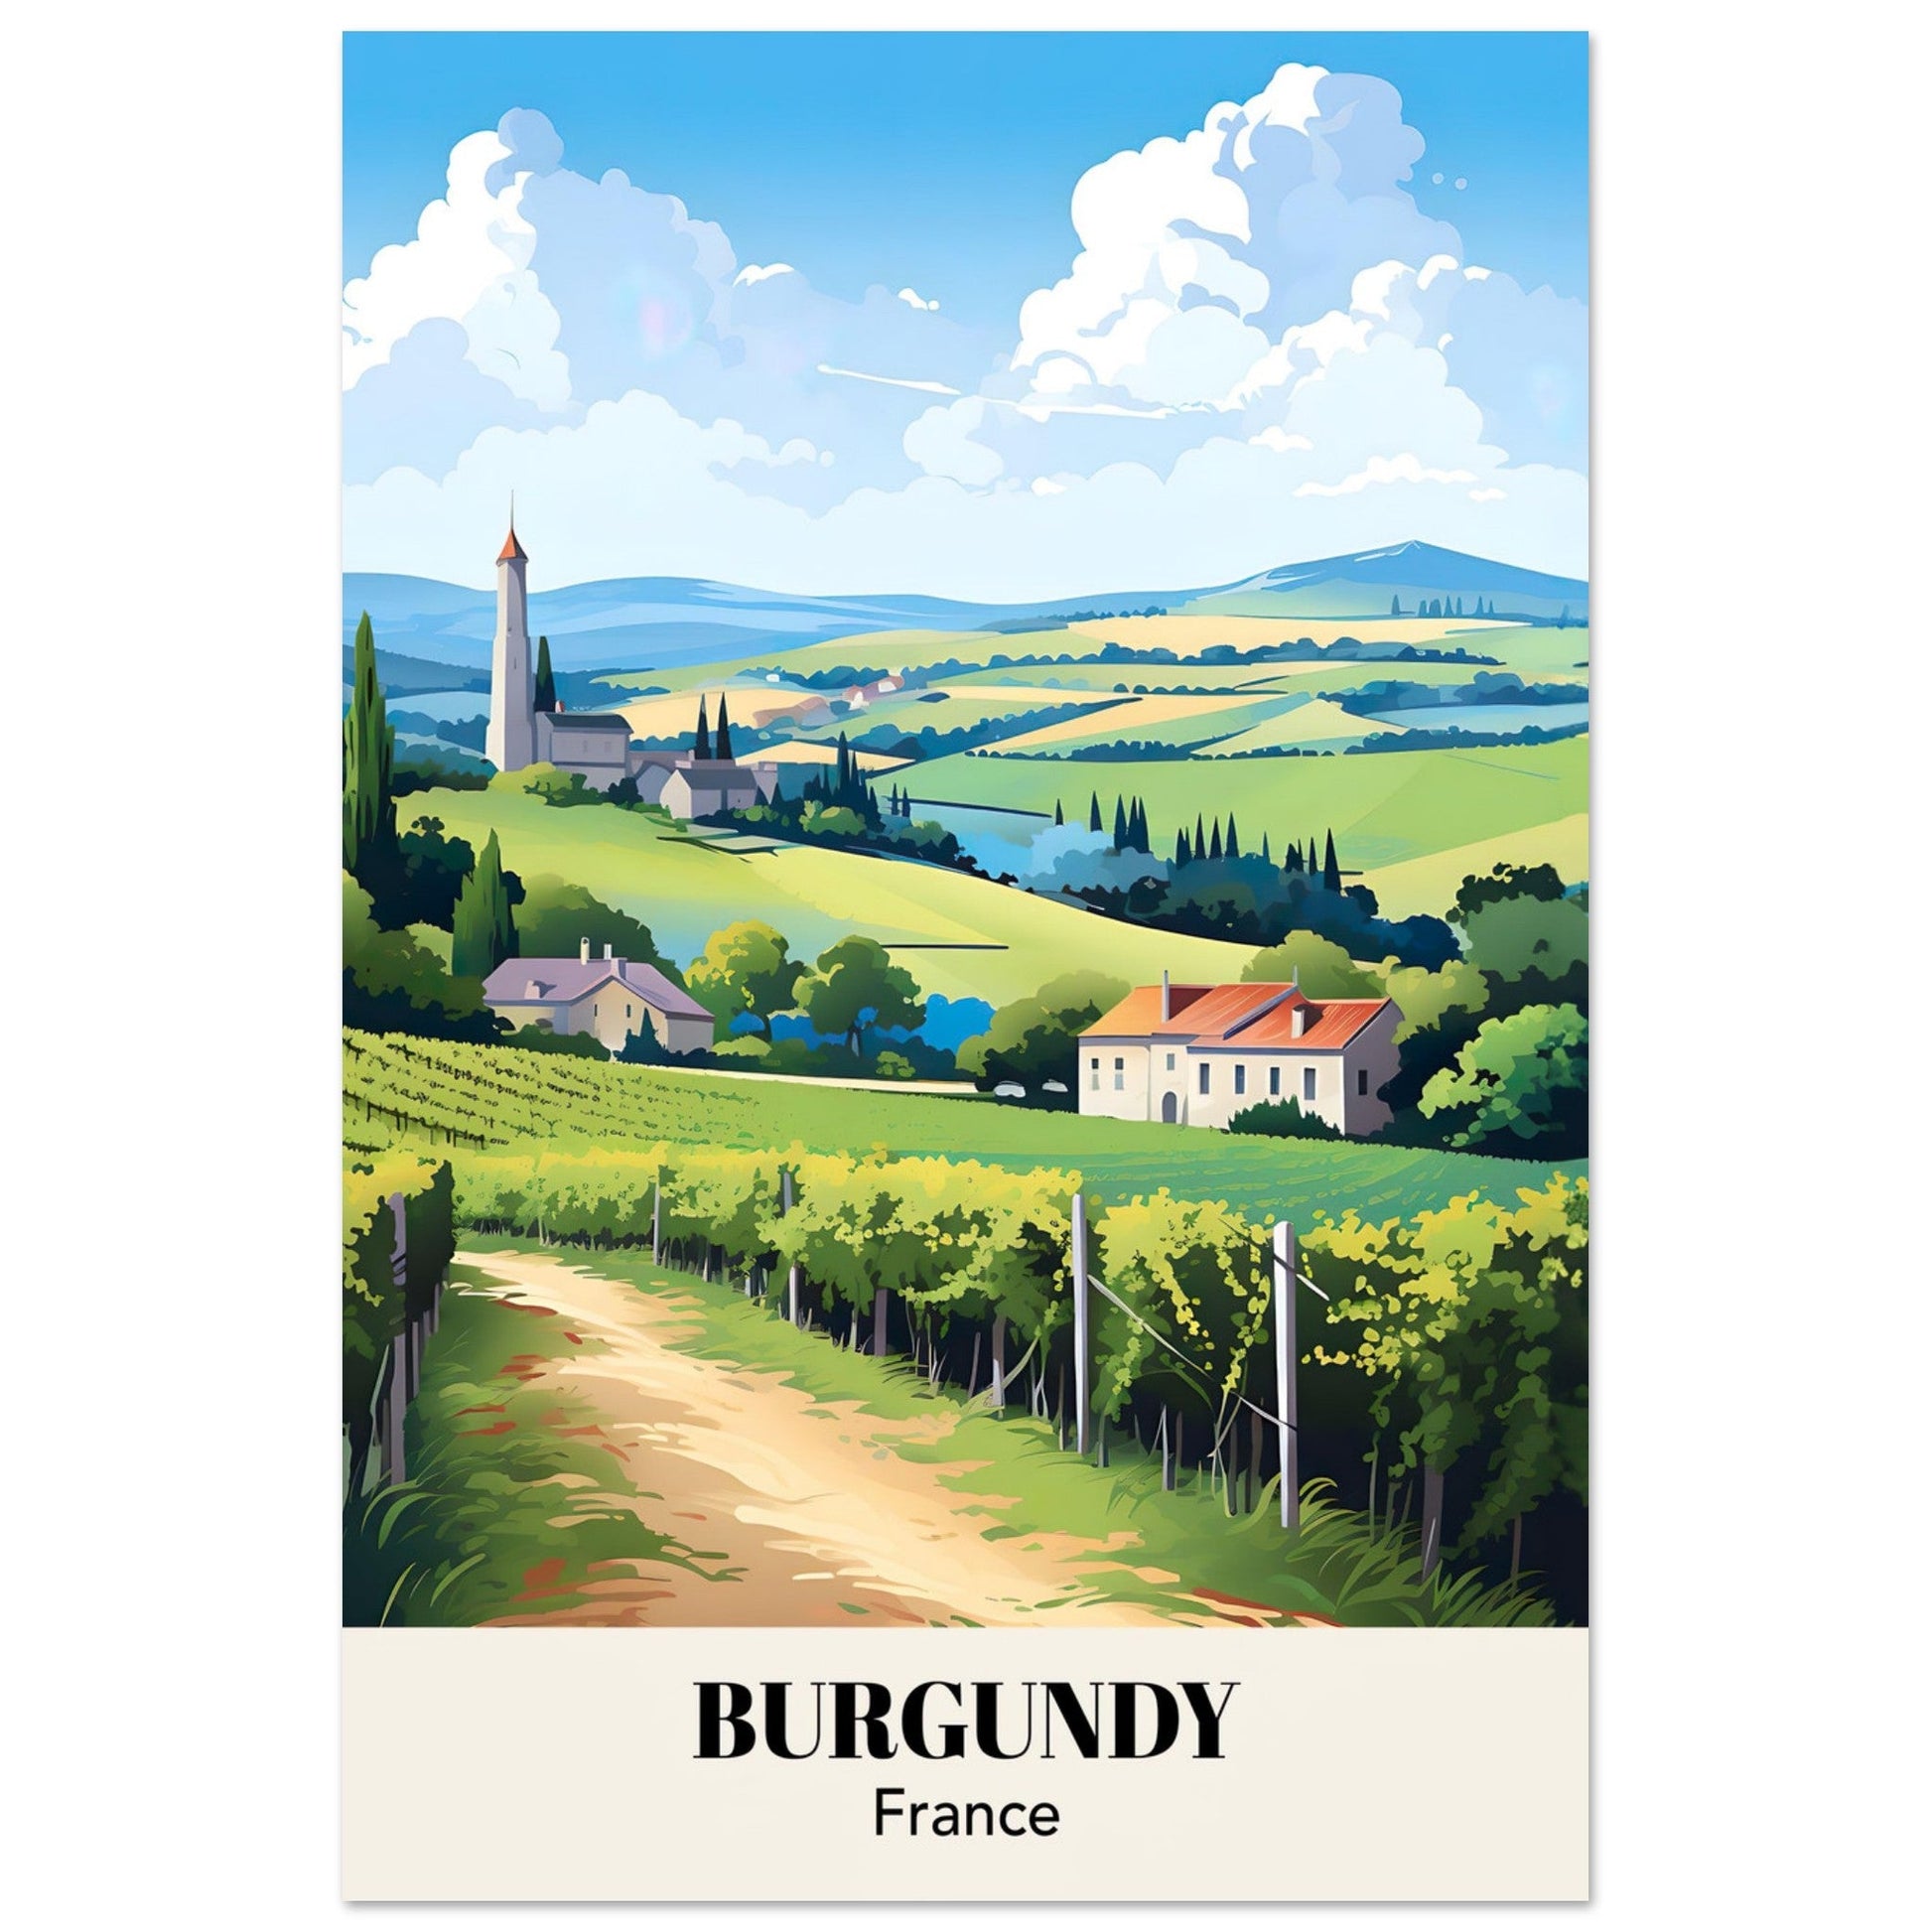 France | Burgundy Retro French County-side Travel Poster | Vintage Wall Art | Colorful Travel Print -Art Of Whim